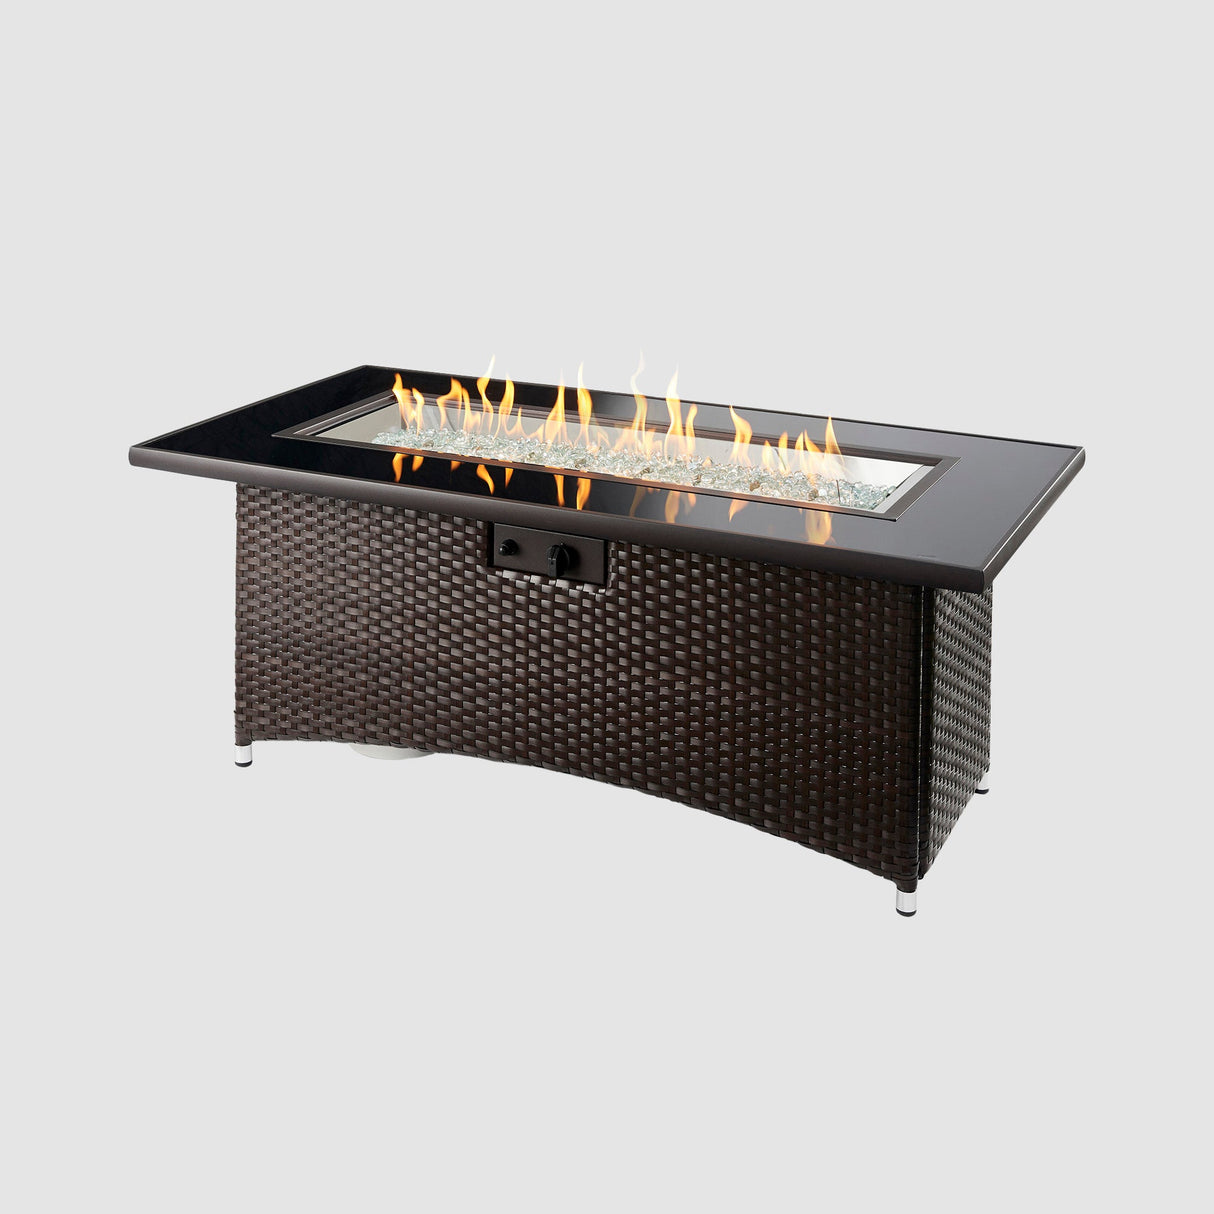 Montego Linear Gas Fire Pit Table on a grey background